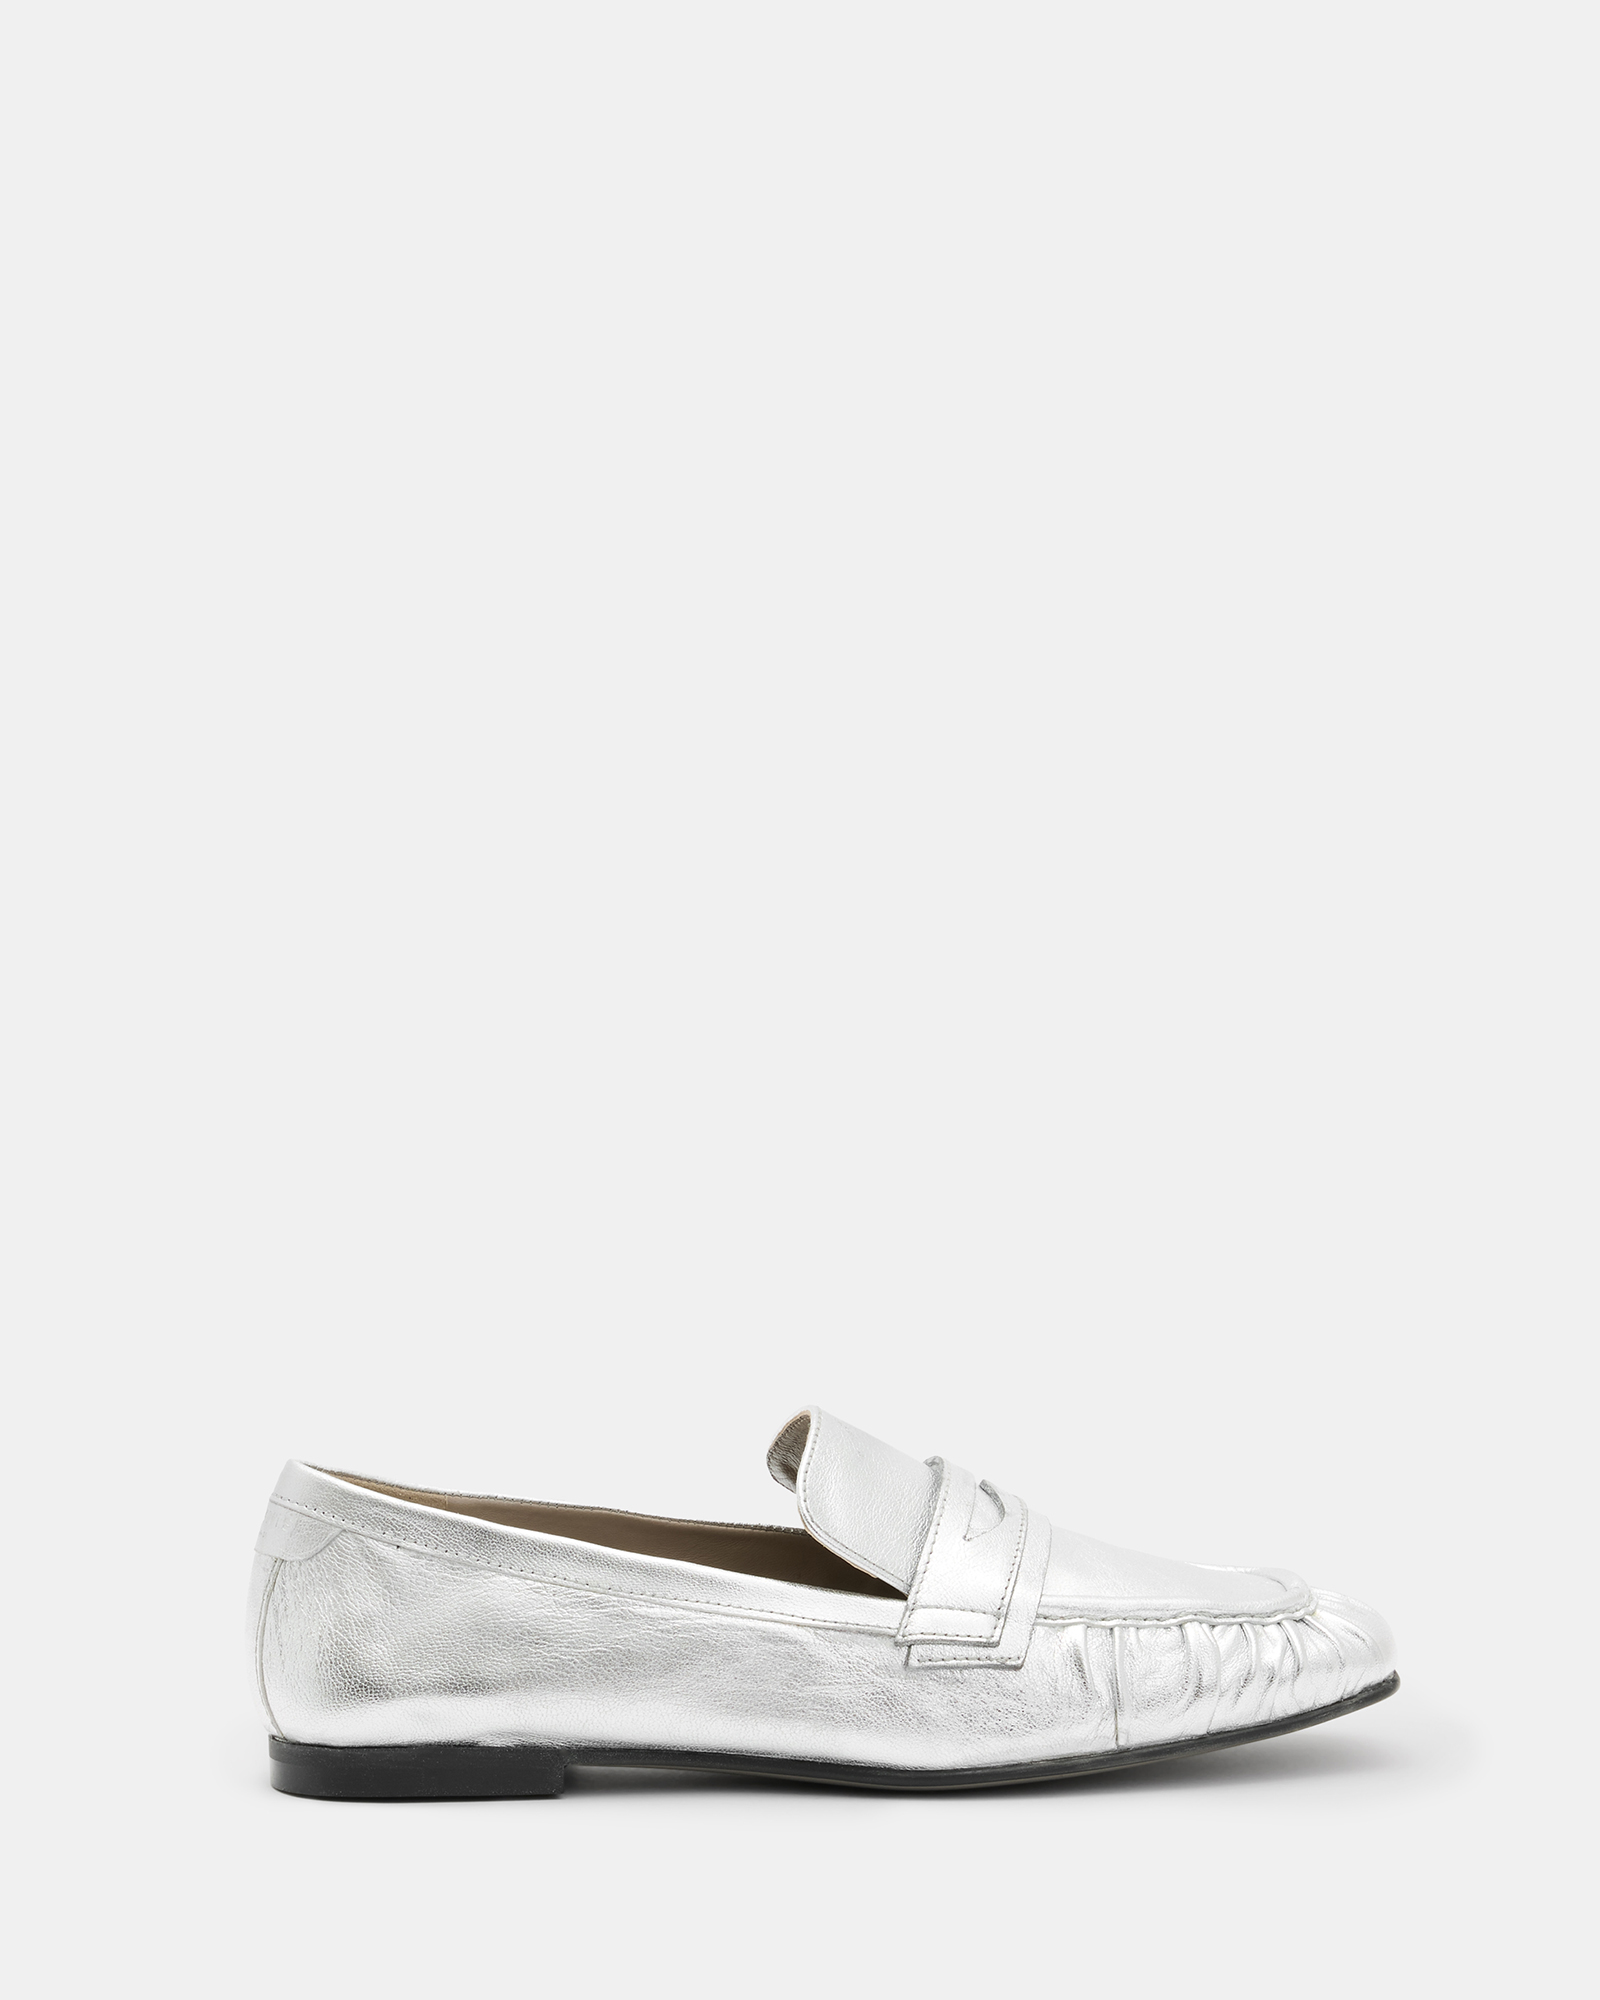 AllSaints Sapphire Metallic Leather Loafer Shoes,, Metallic Silver